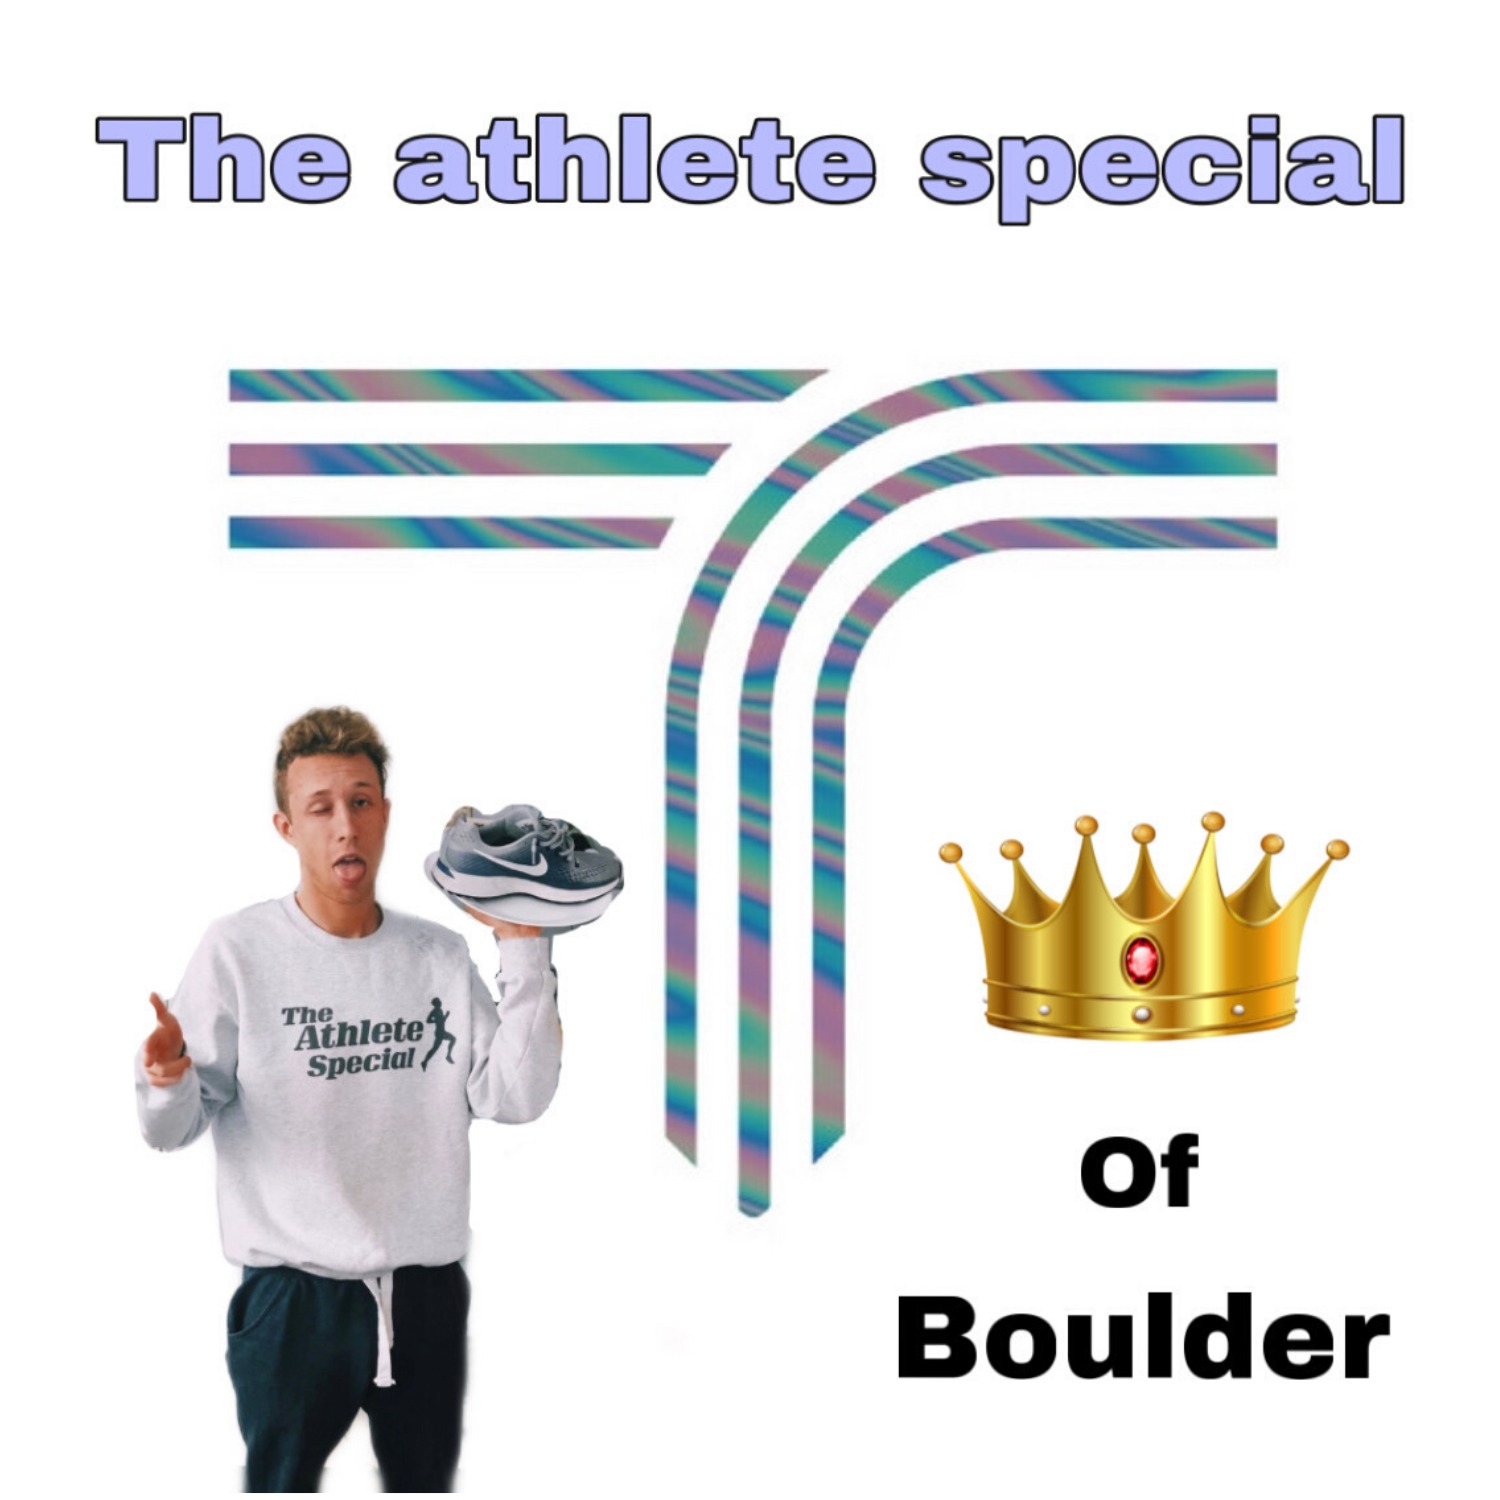 THE ATHLETE SPECIAL - The king of boulder